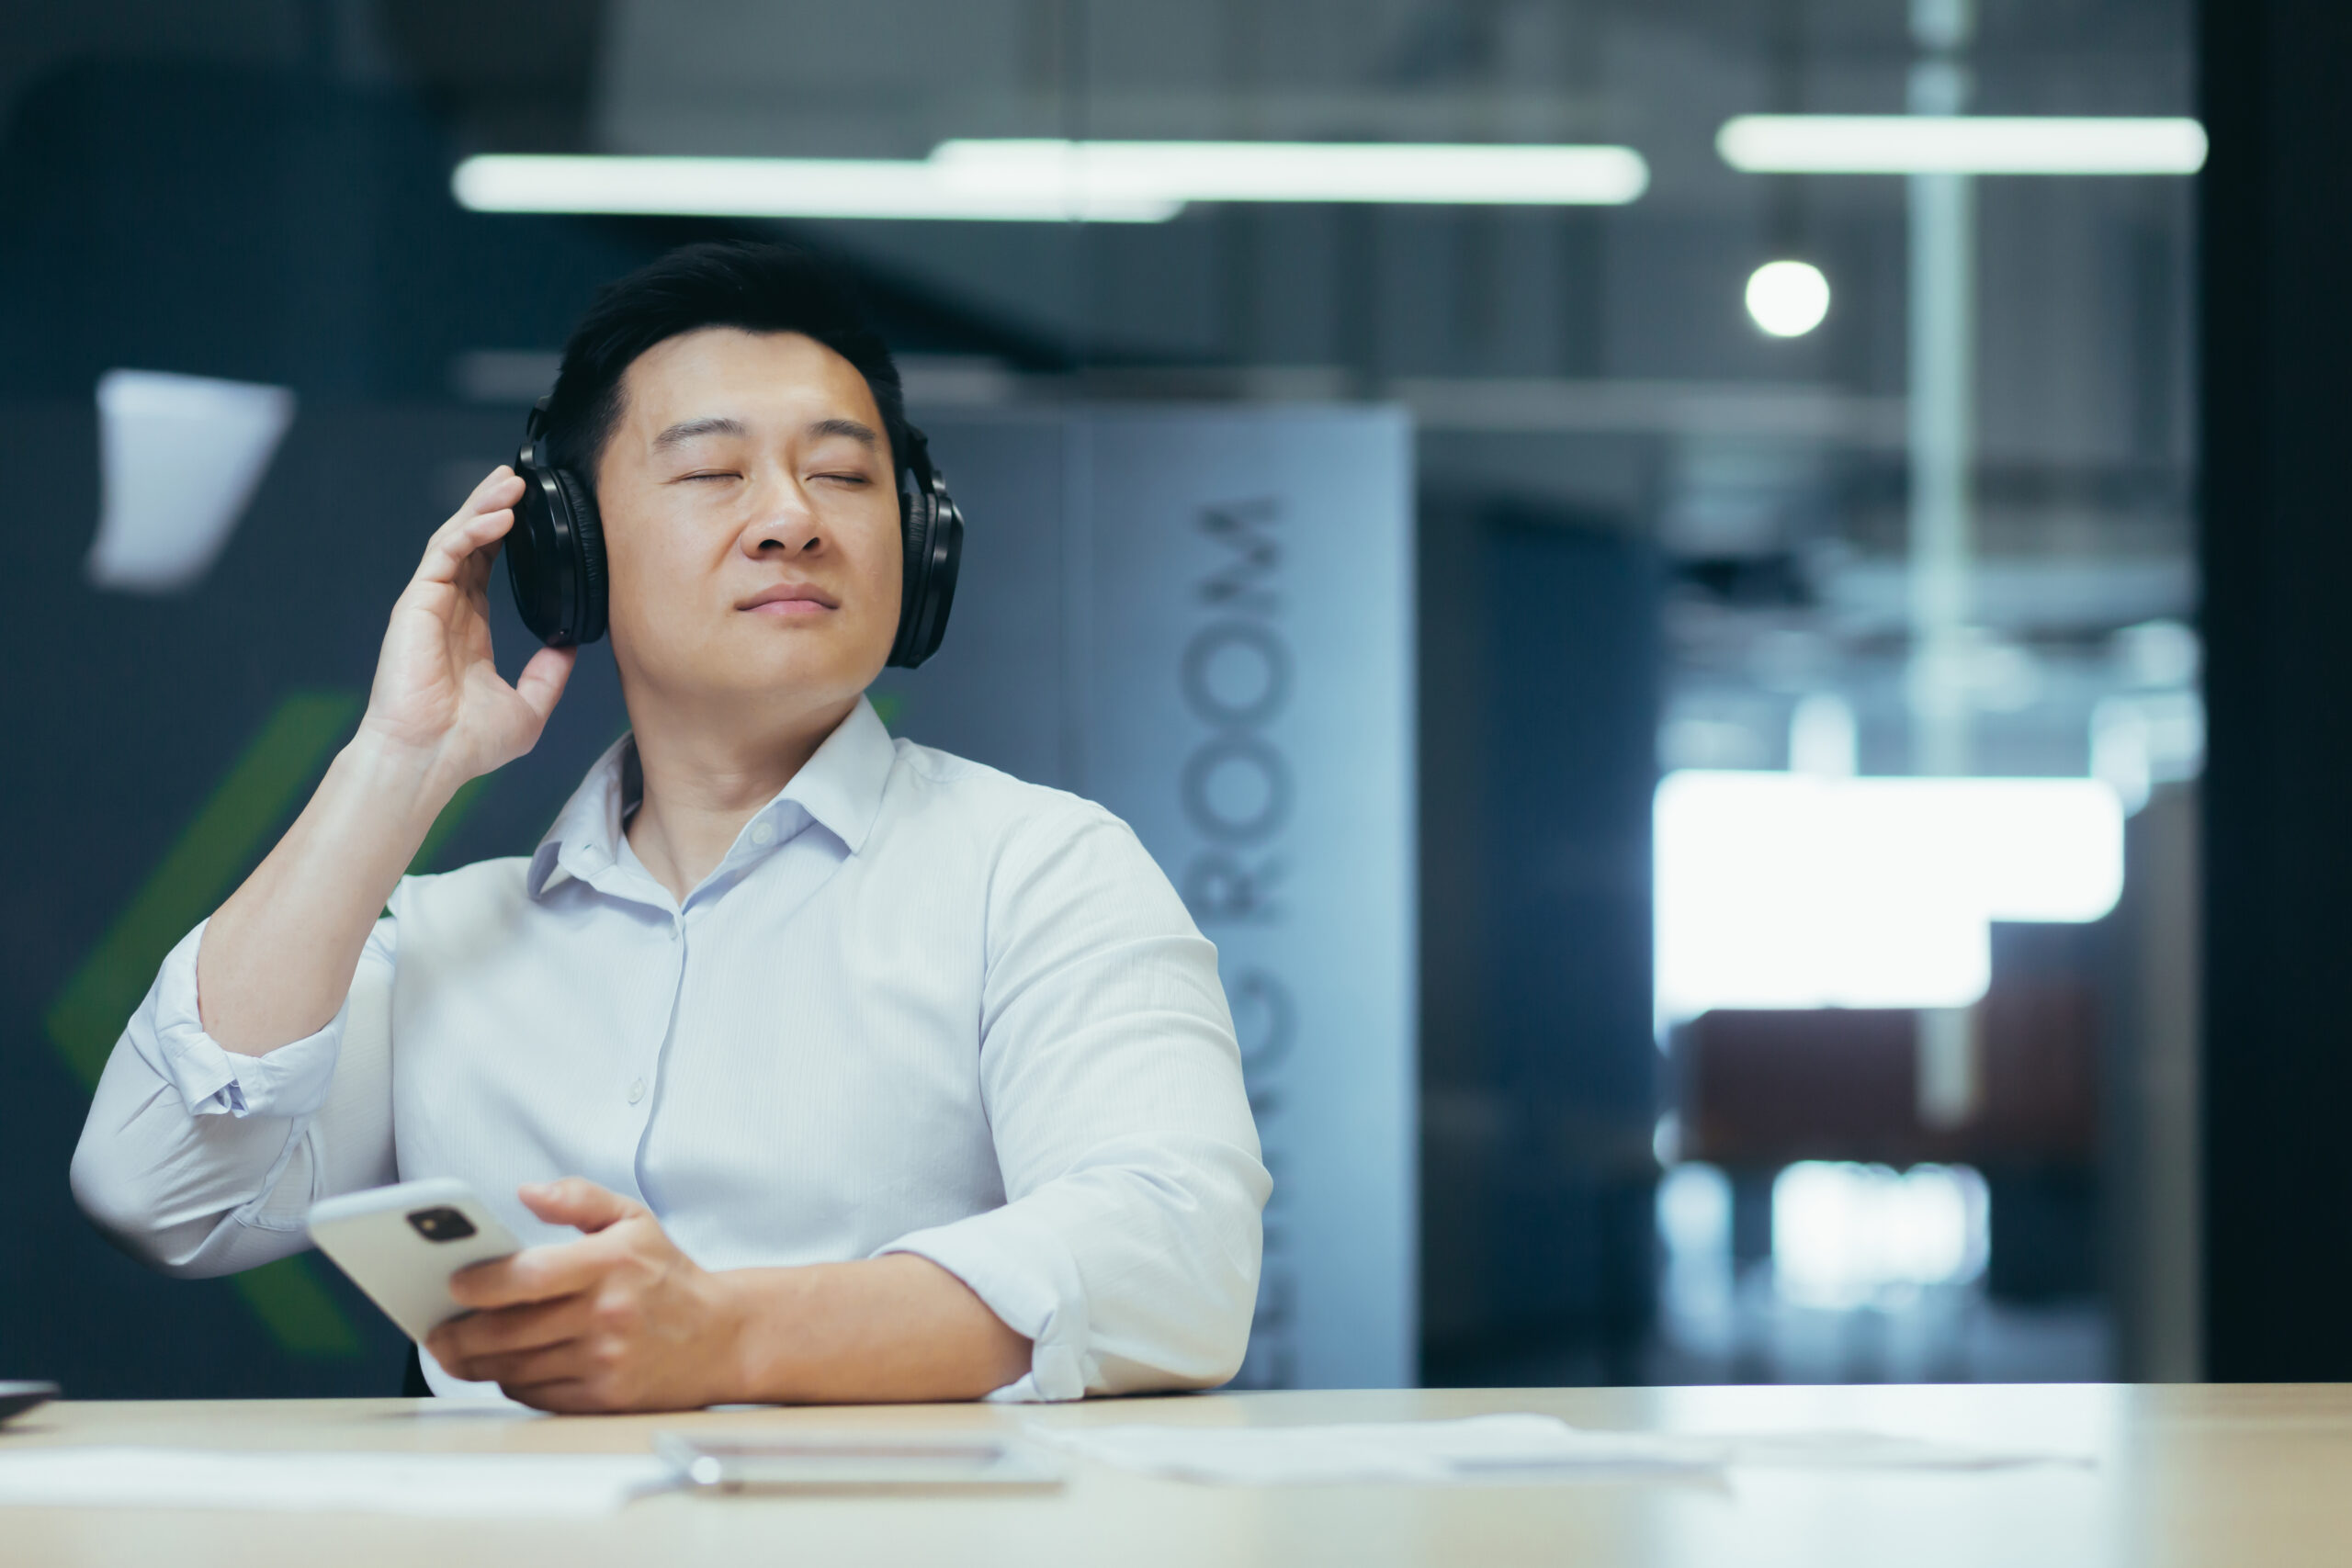 Asian boss business owner relaxing in office, listening relaxing and relaxing music, man sitting at desk, using big headphones and online listening app on phone